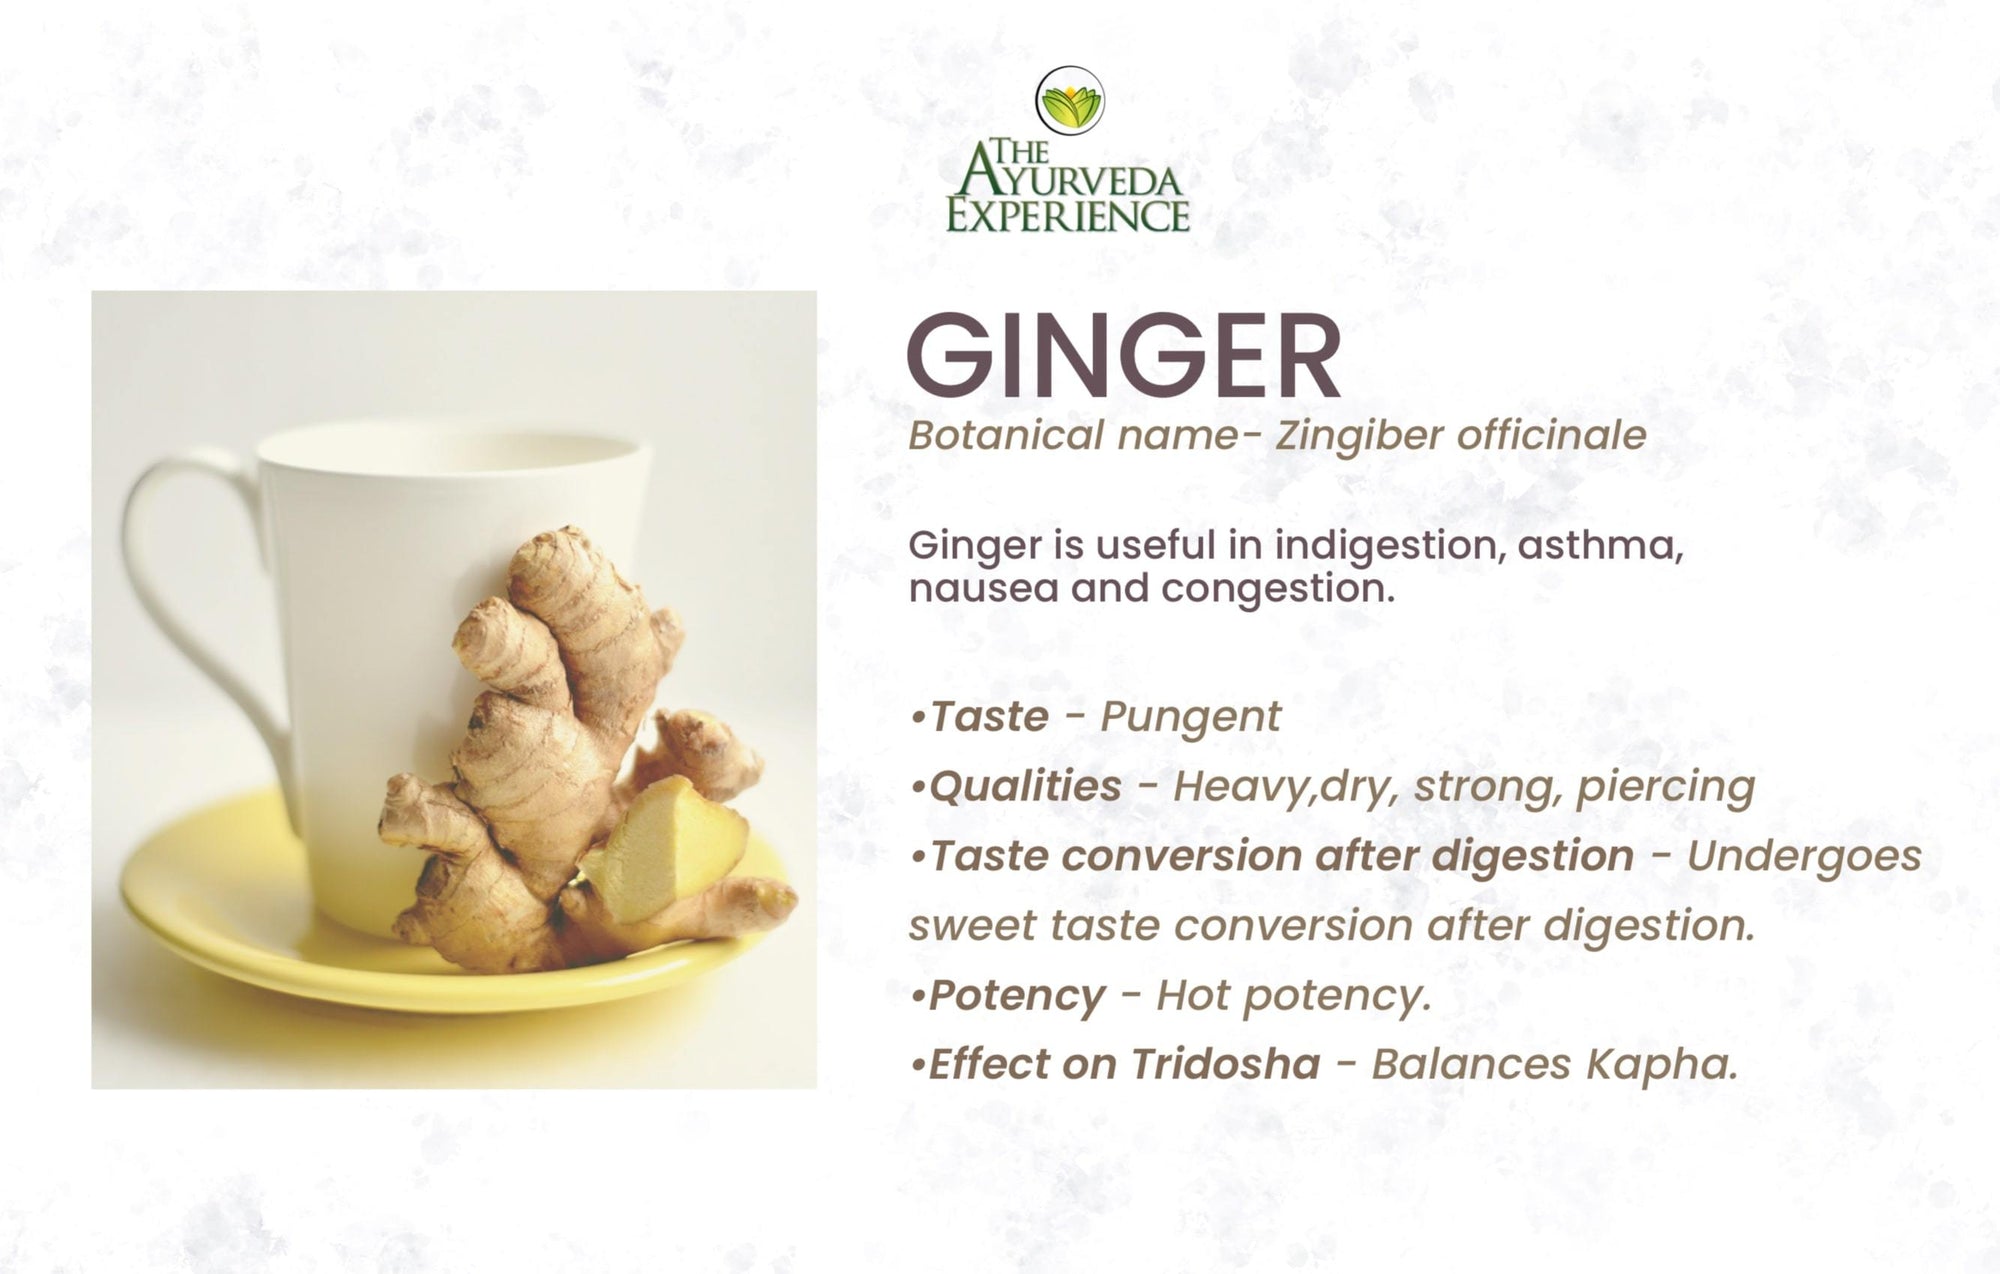 Home Remedies using Ginger